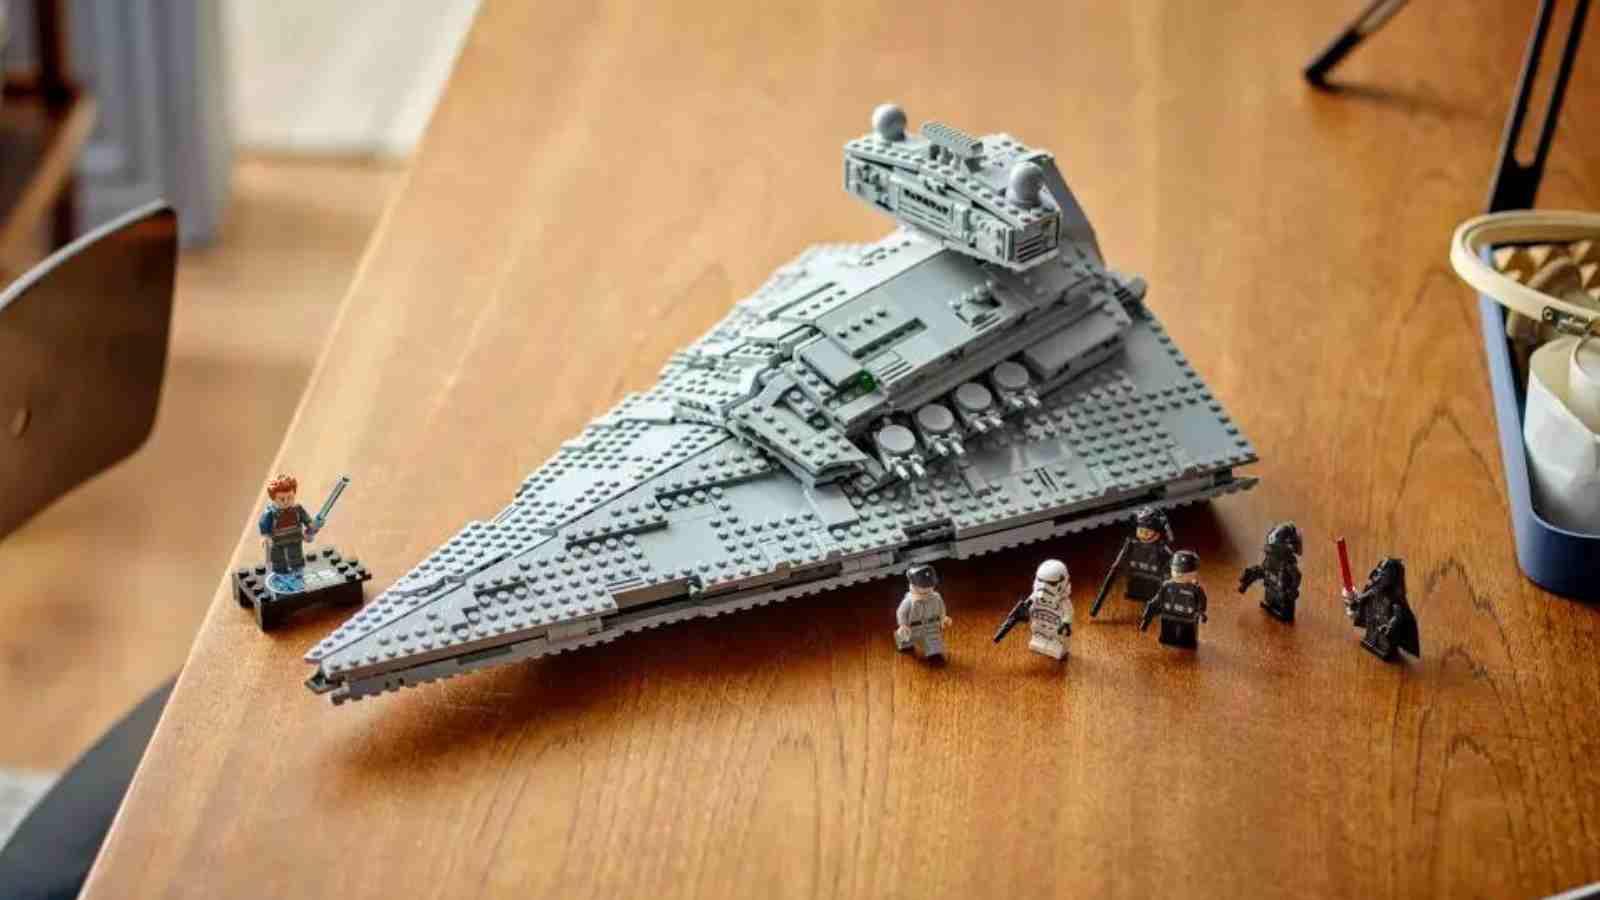 The LEGO Star Wars Imperial Star Destroyer on display